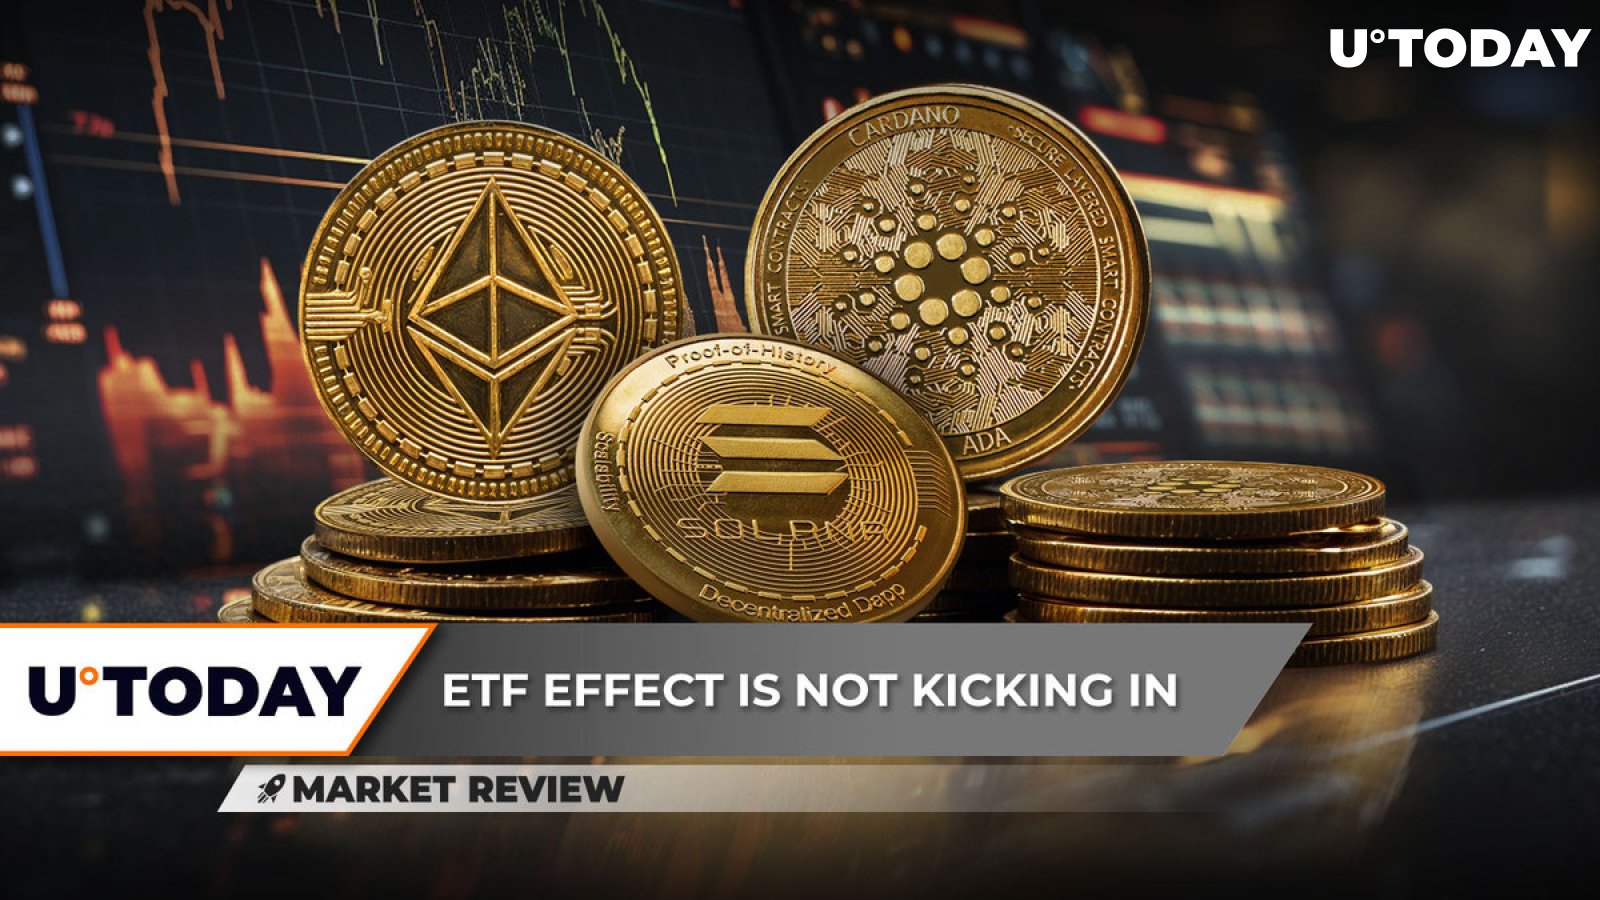 Solana (SOL) Plummets 10%, Here's Why, Ethereum ETF Effect: Will It Kick In? Cardano (ADA) Brand New Support Level